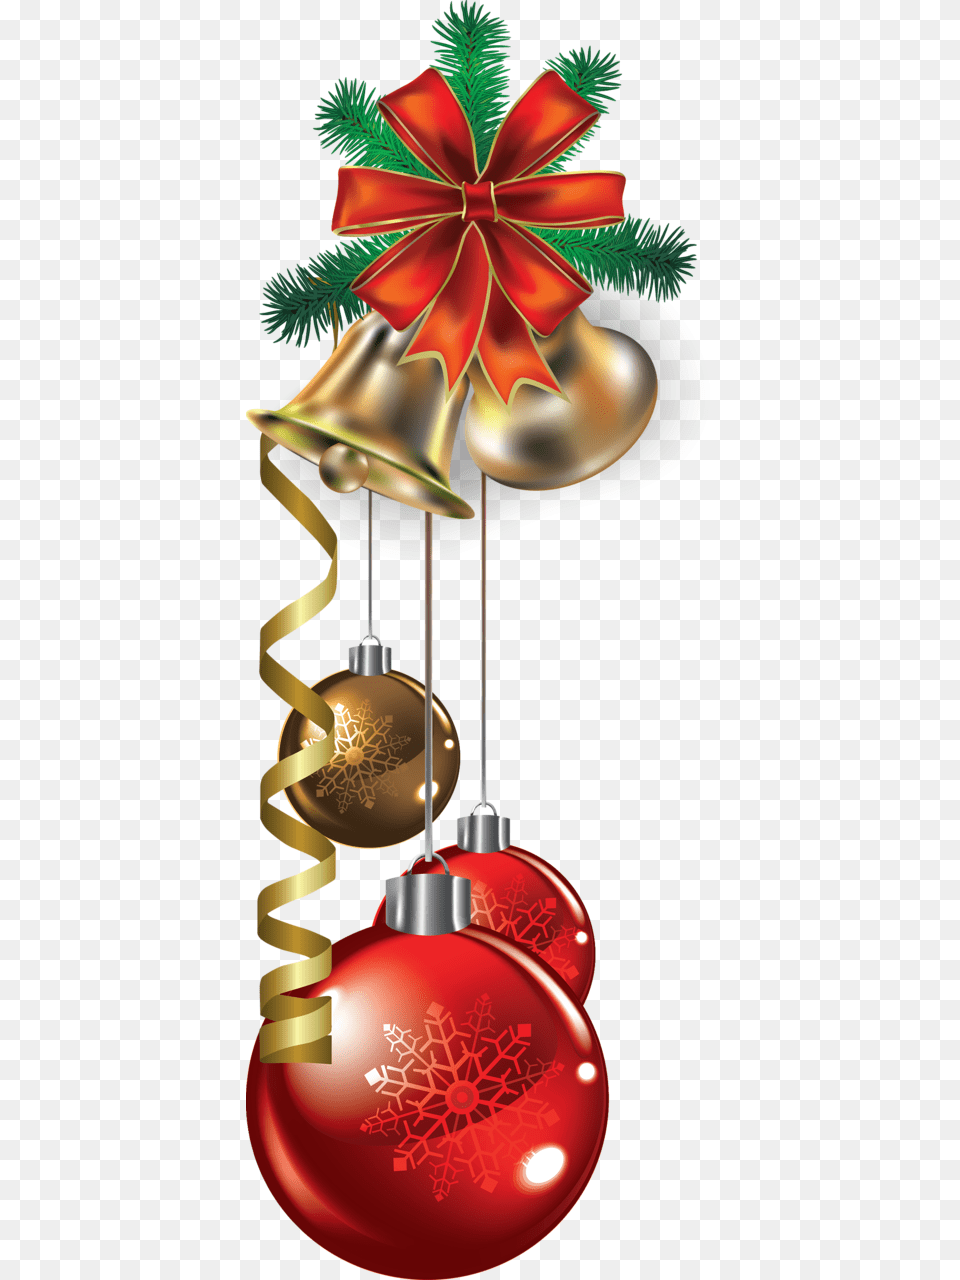 Transparent Natal Christmas Tree Decoration Hd, Chandelier, Lamp, Accessories Png Image